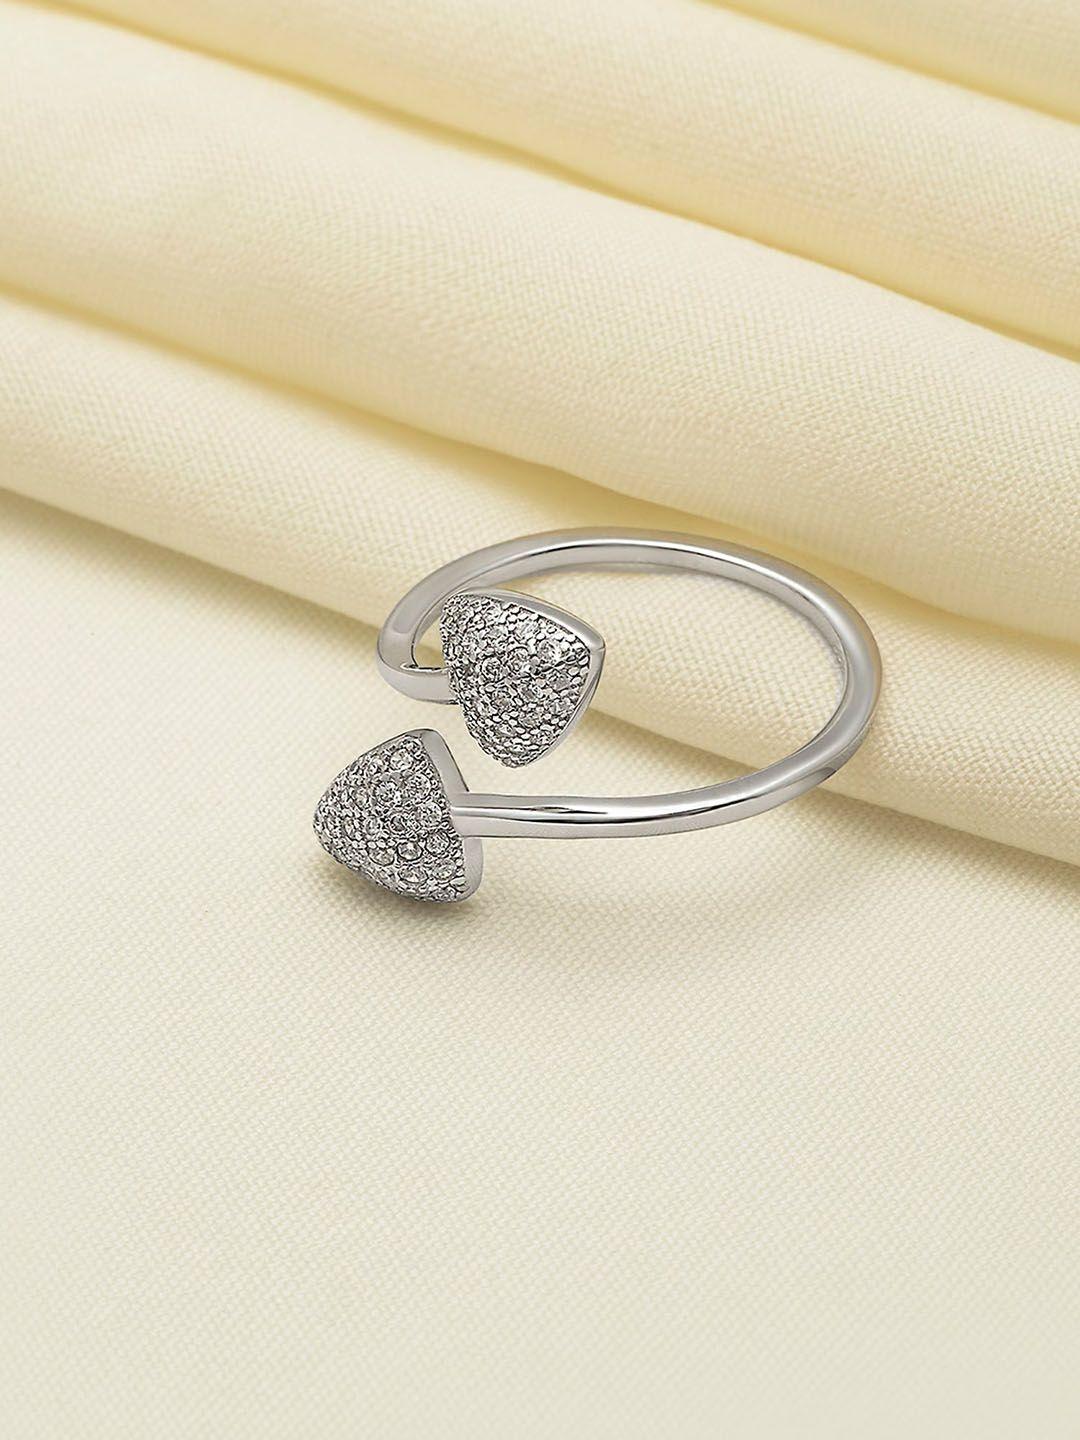 silberry 925 sterling silver-plated cz studded adjustable finger ring